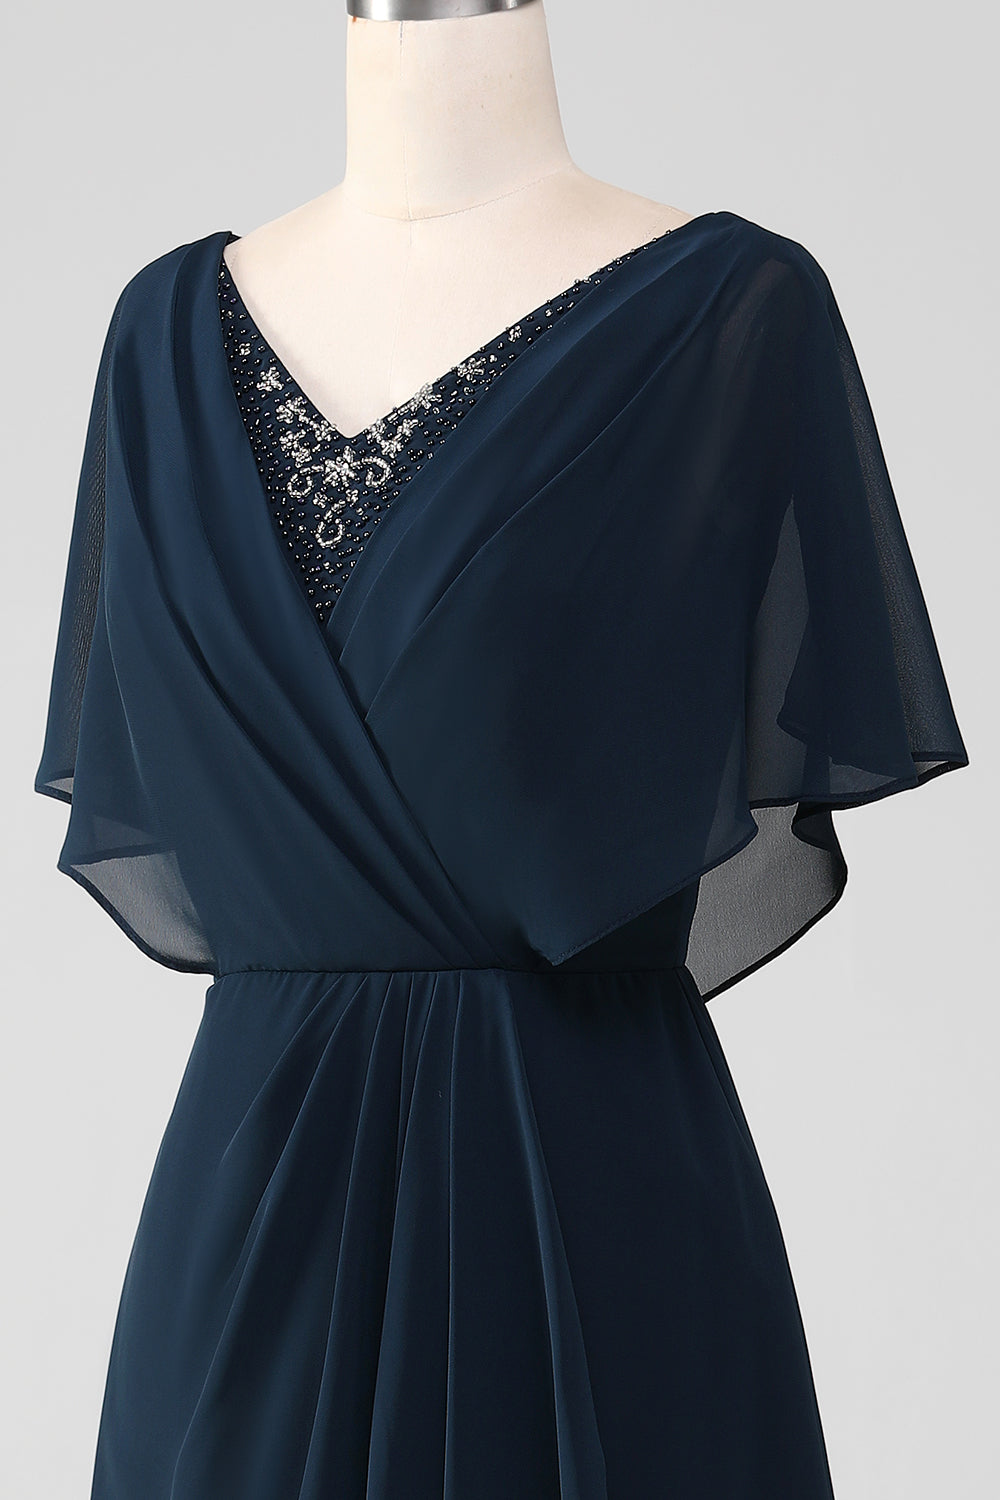 Navy A-Line V-Neck Asymmetrical Sequins Mother of the Bride Dress With Beading